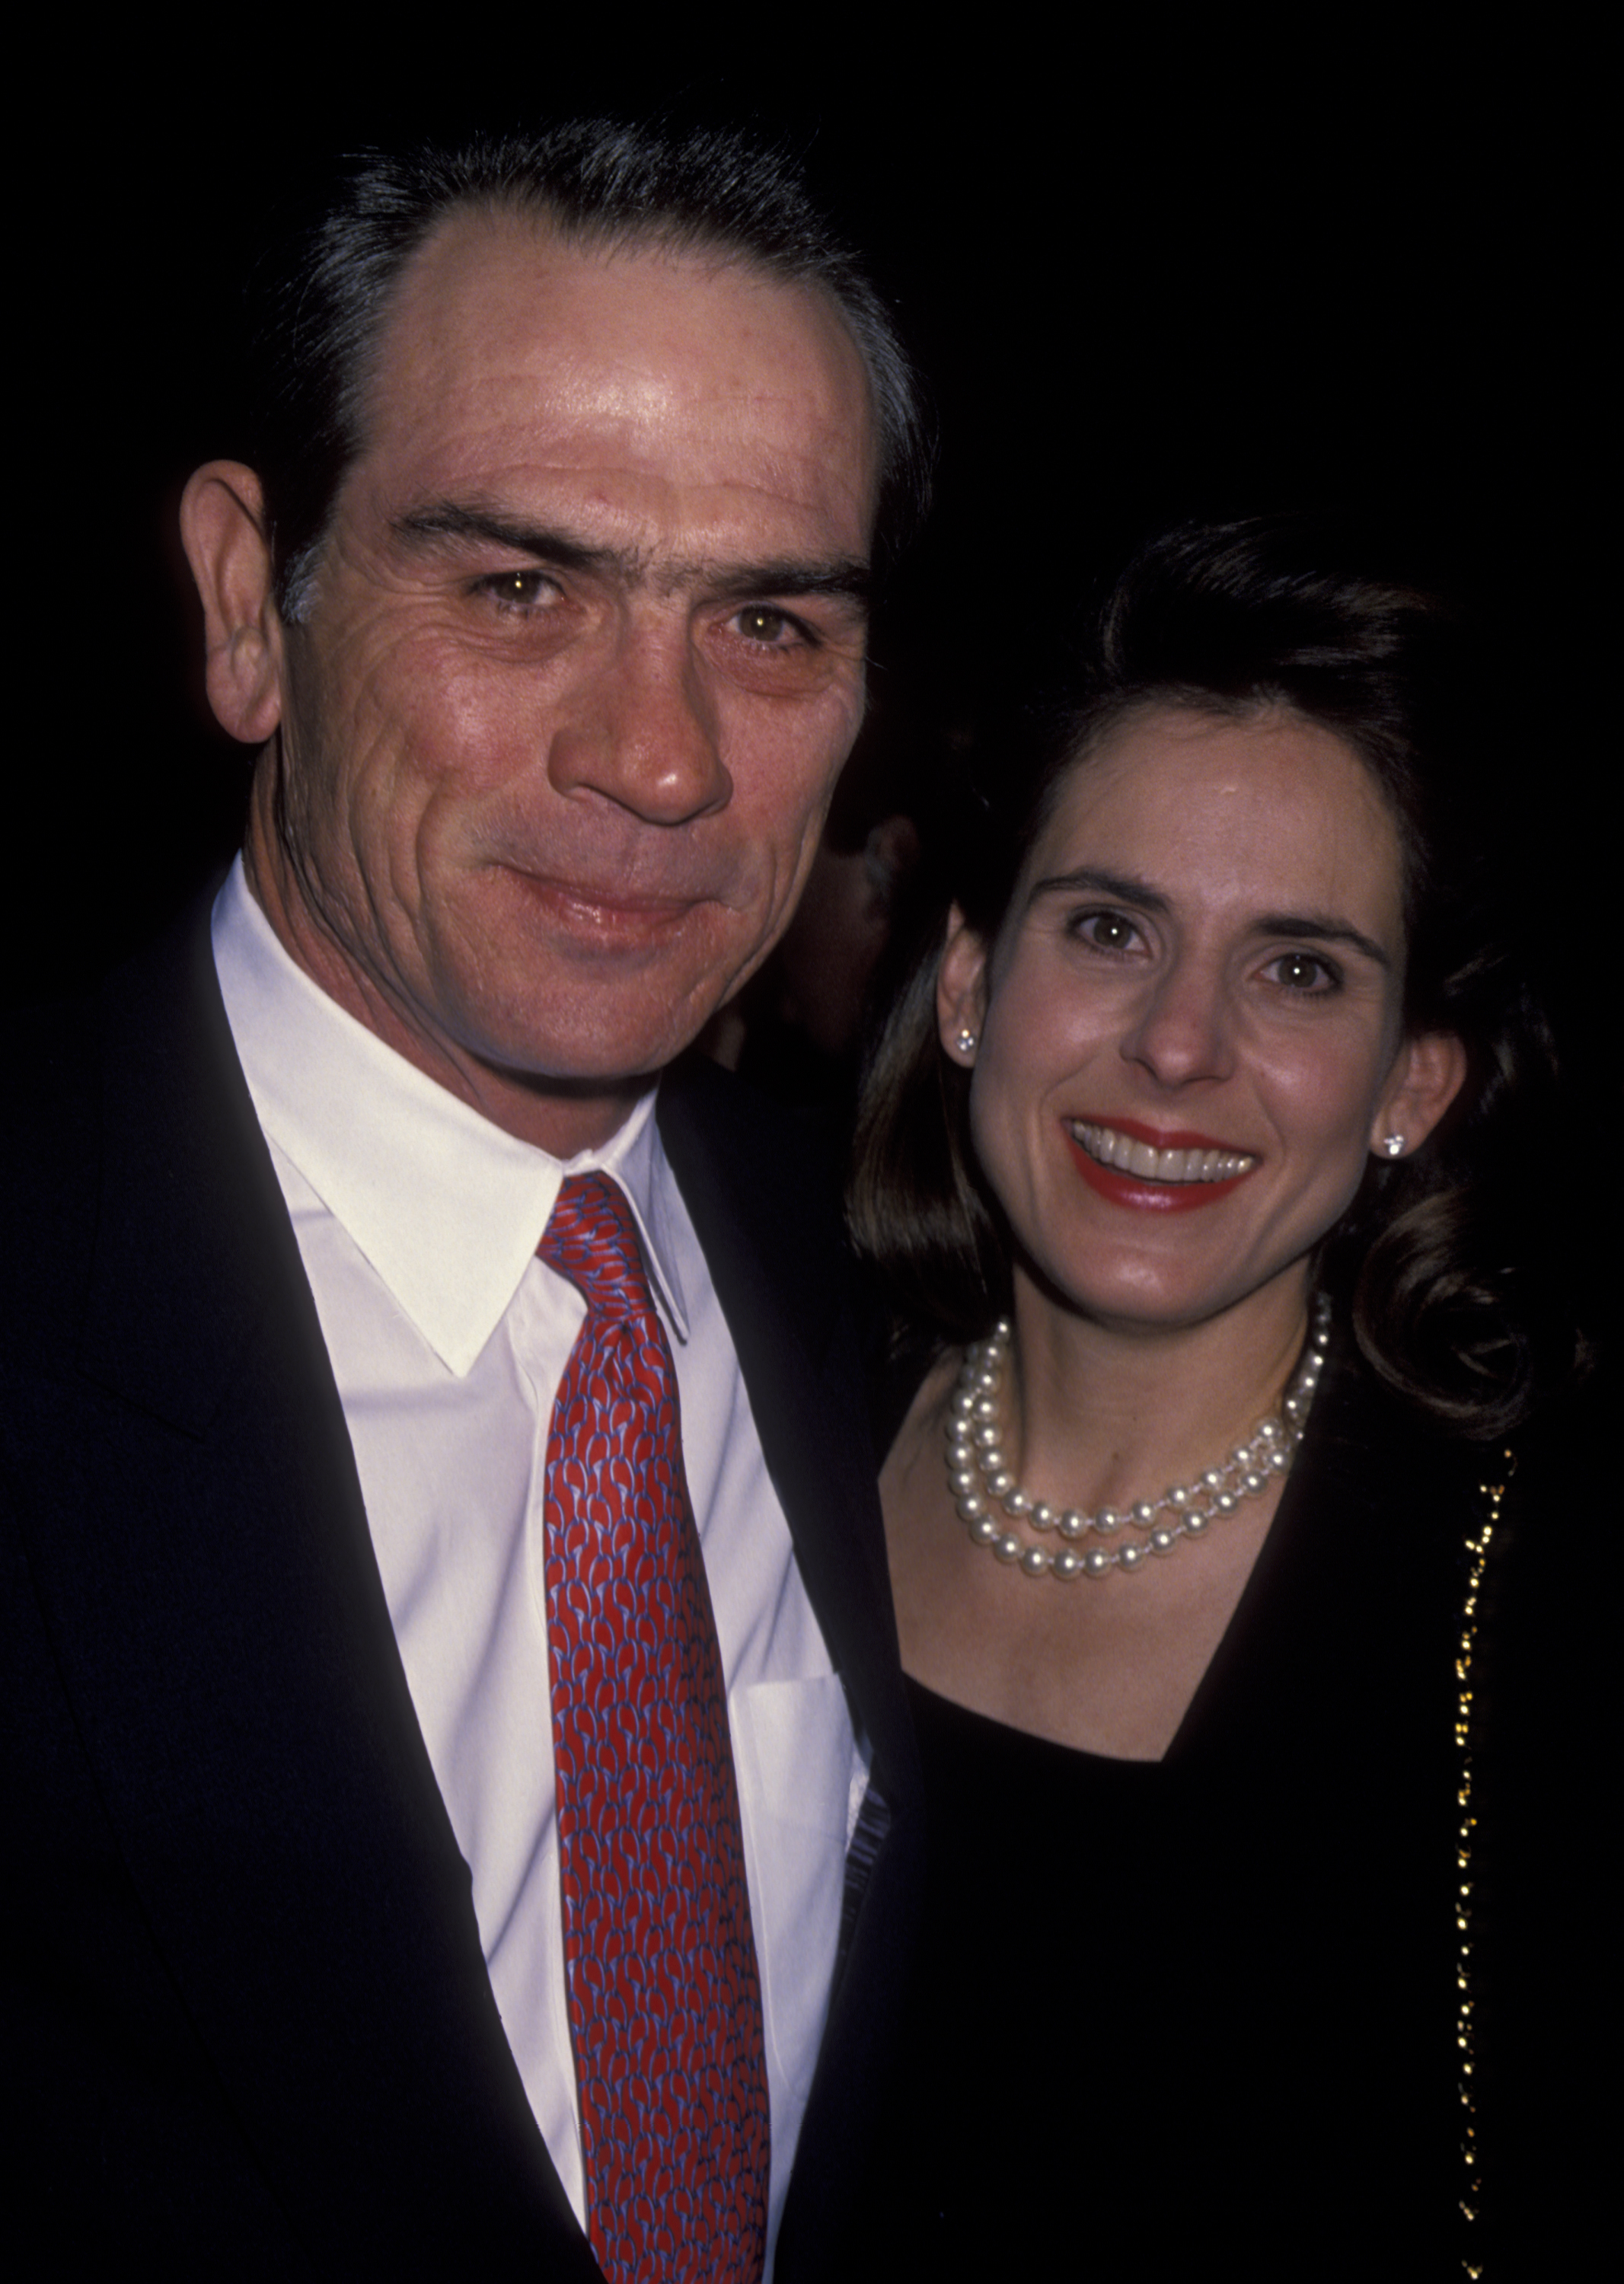 Tommy Lee Jones and his wife Kimberlea Jones at the screening of "Cobb" on November 29, 1994, in Beverly Hills, California | Source: Getty Images